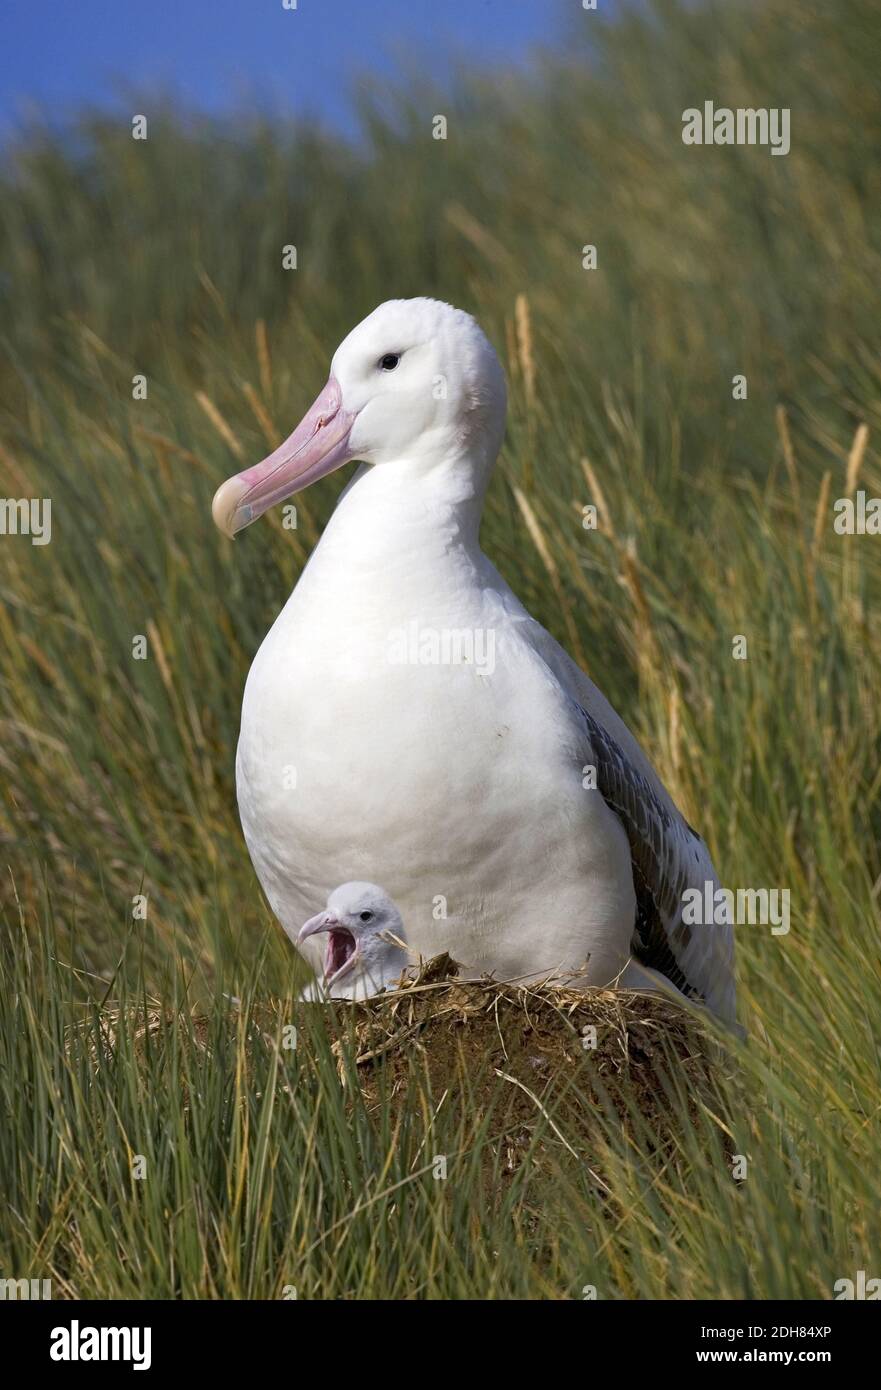 Wandering Albatros, Snowy Albatross (Diomedea exulans), adult with chick in the nest, Suedgeorgien Stock Photo